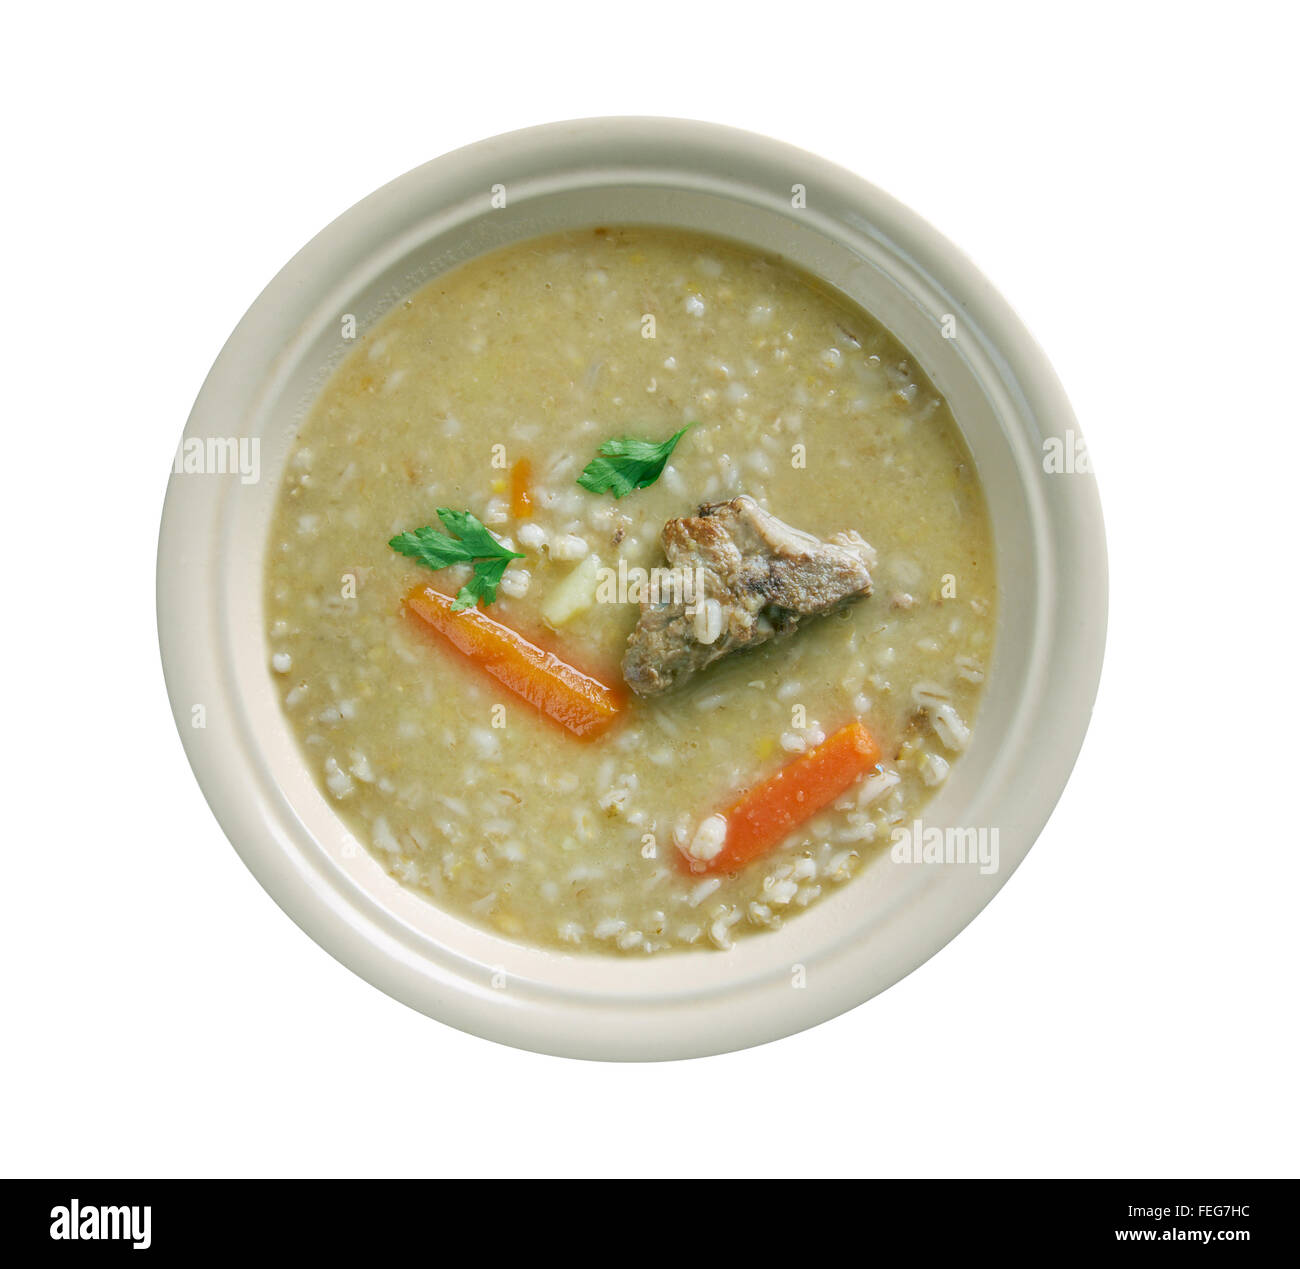 Rumford Soup - peas, barley soup.common base for inexpensive military rations in Central Europe. Stock Photo